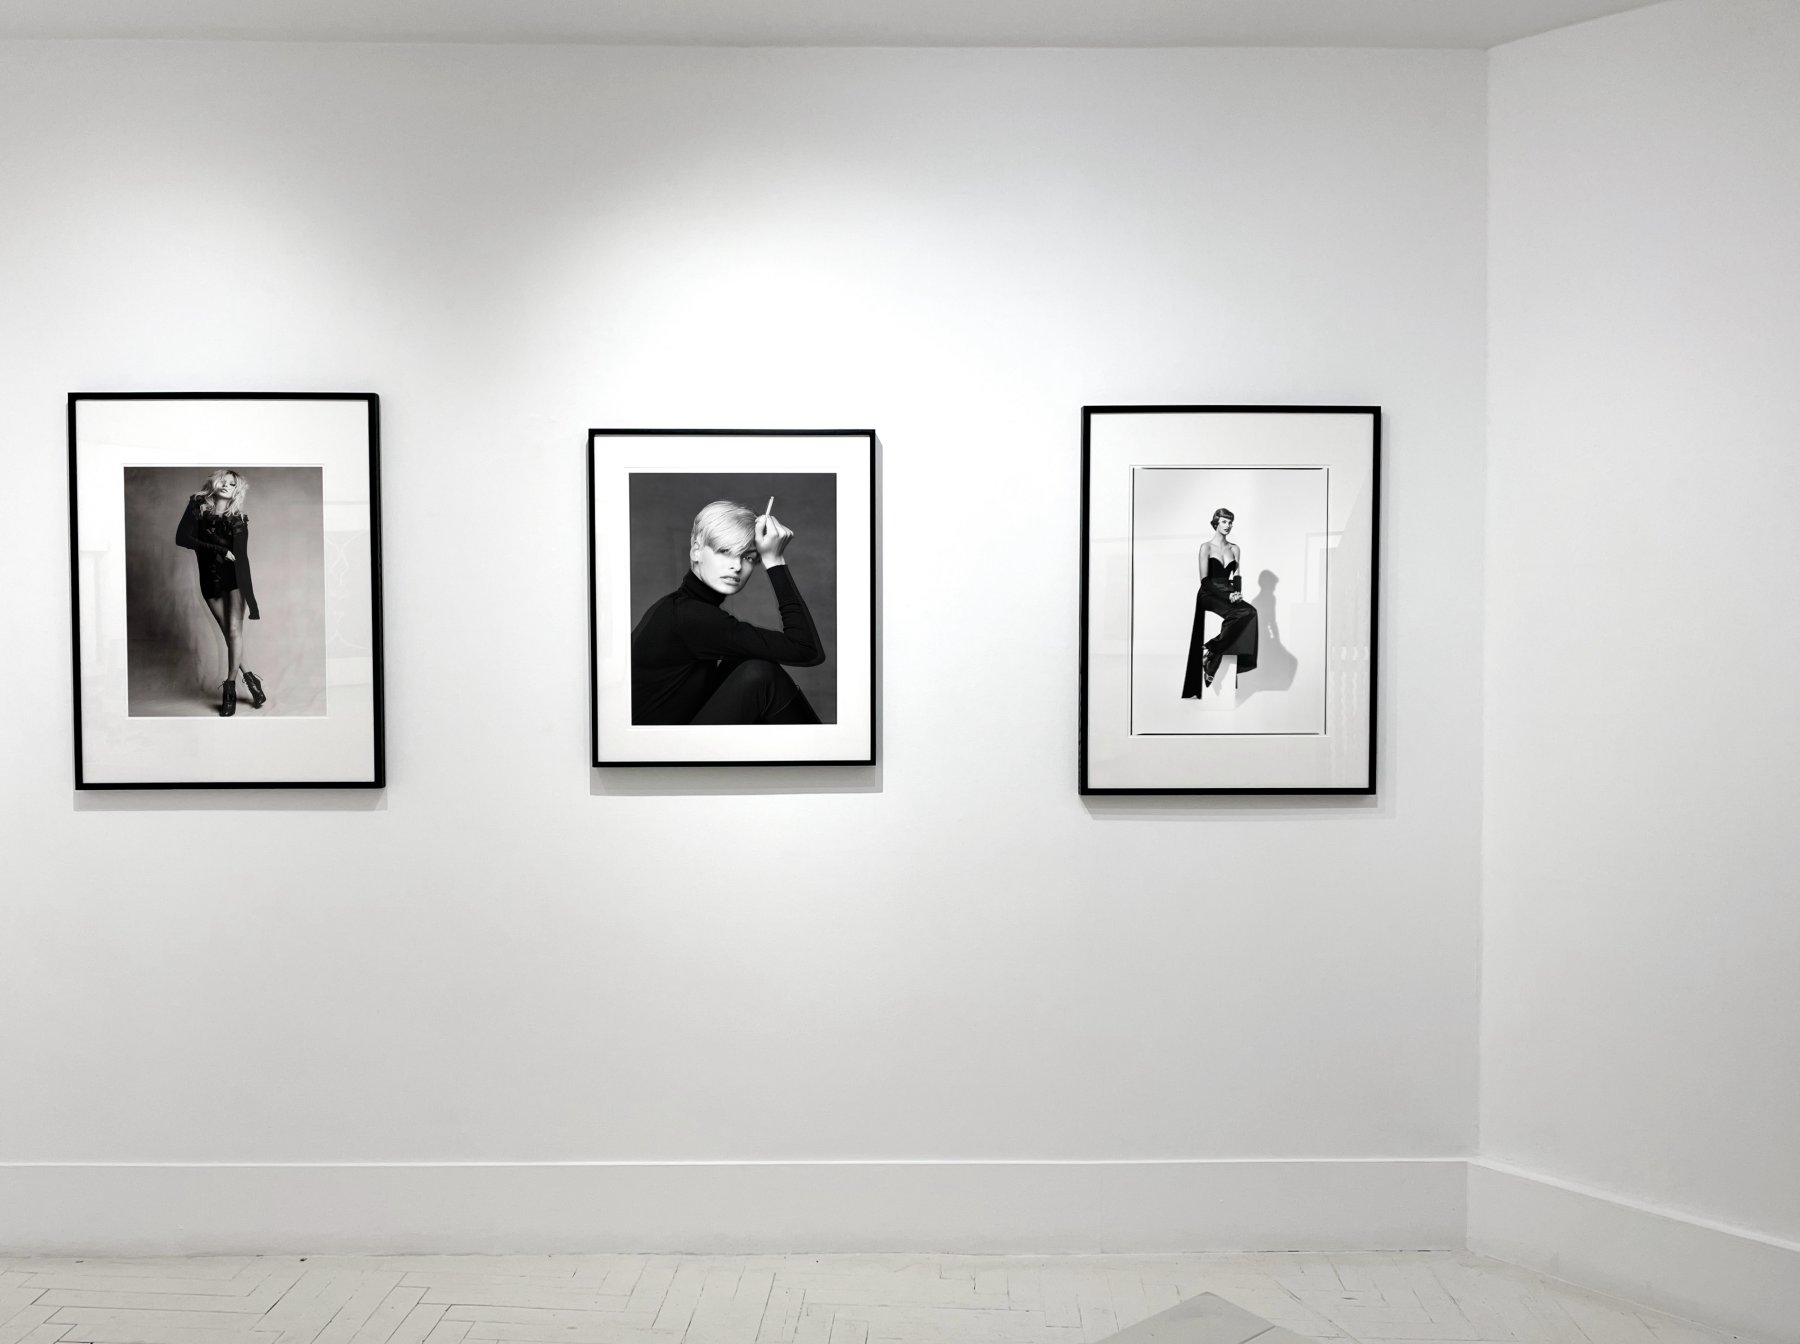 Installation image for Patrick Demarchelier: Legacy, at ATLAS Gallery